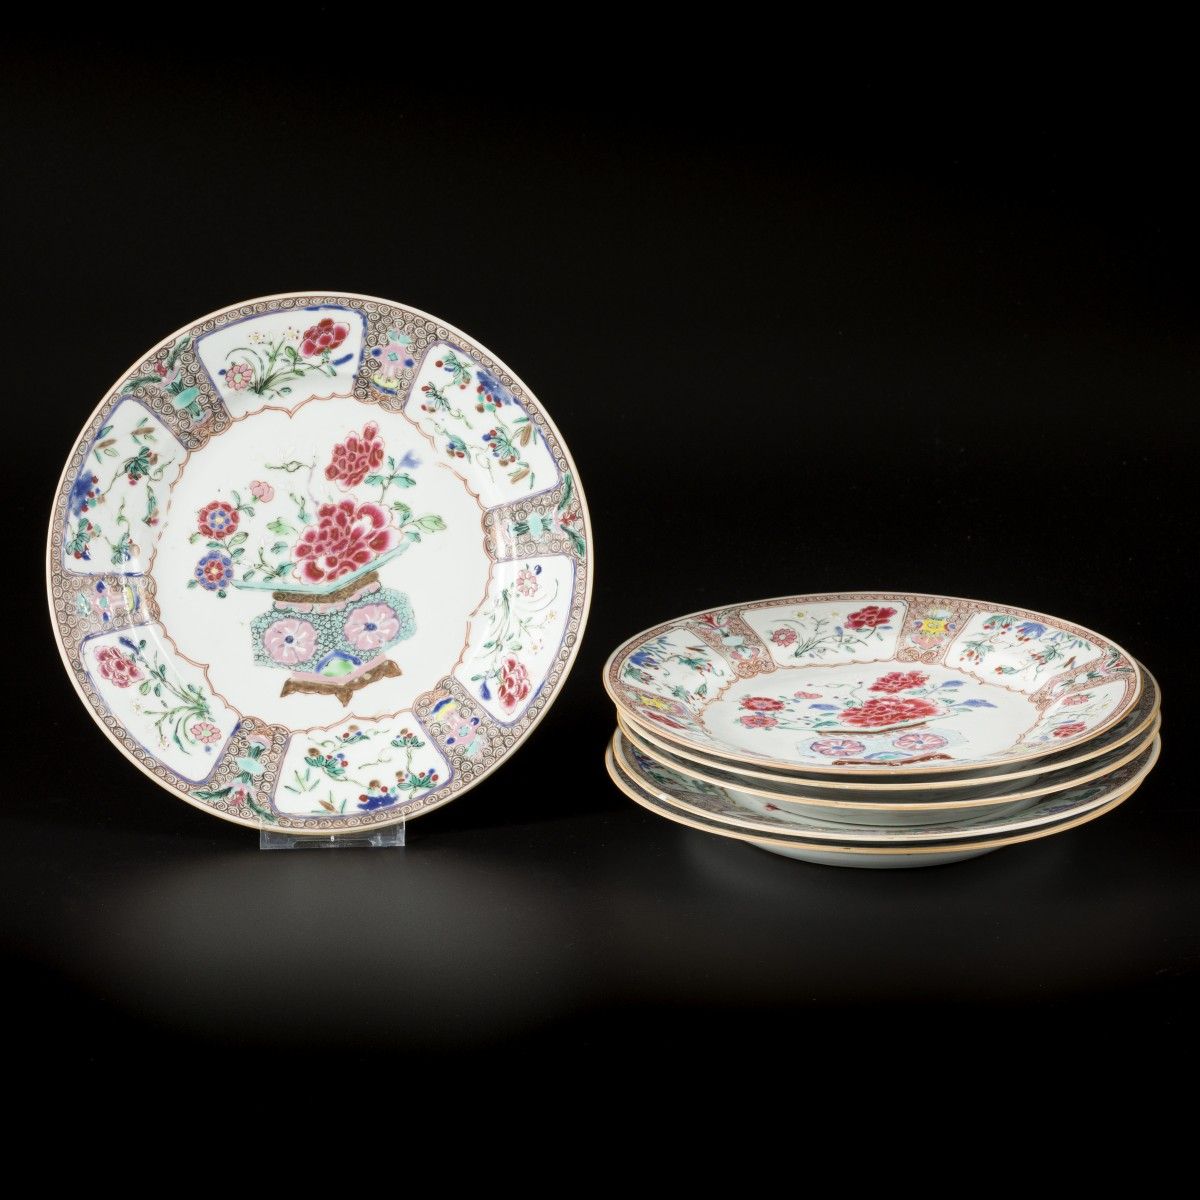 A set of (6) porcelain plates with floral decoration, China, 18th century. Durch&hellip;